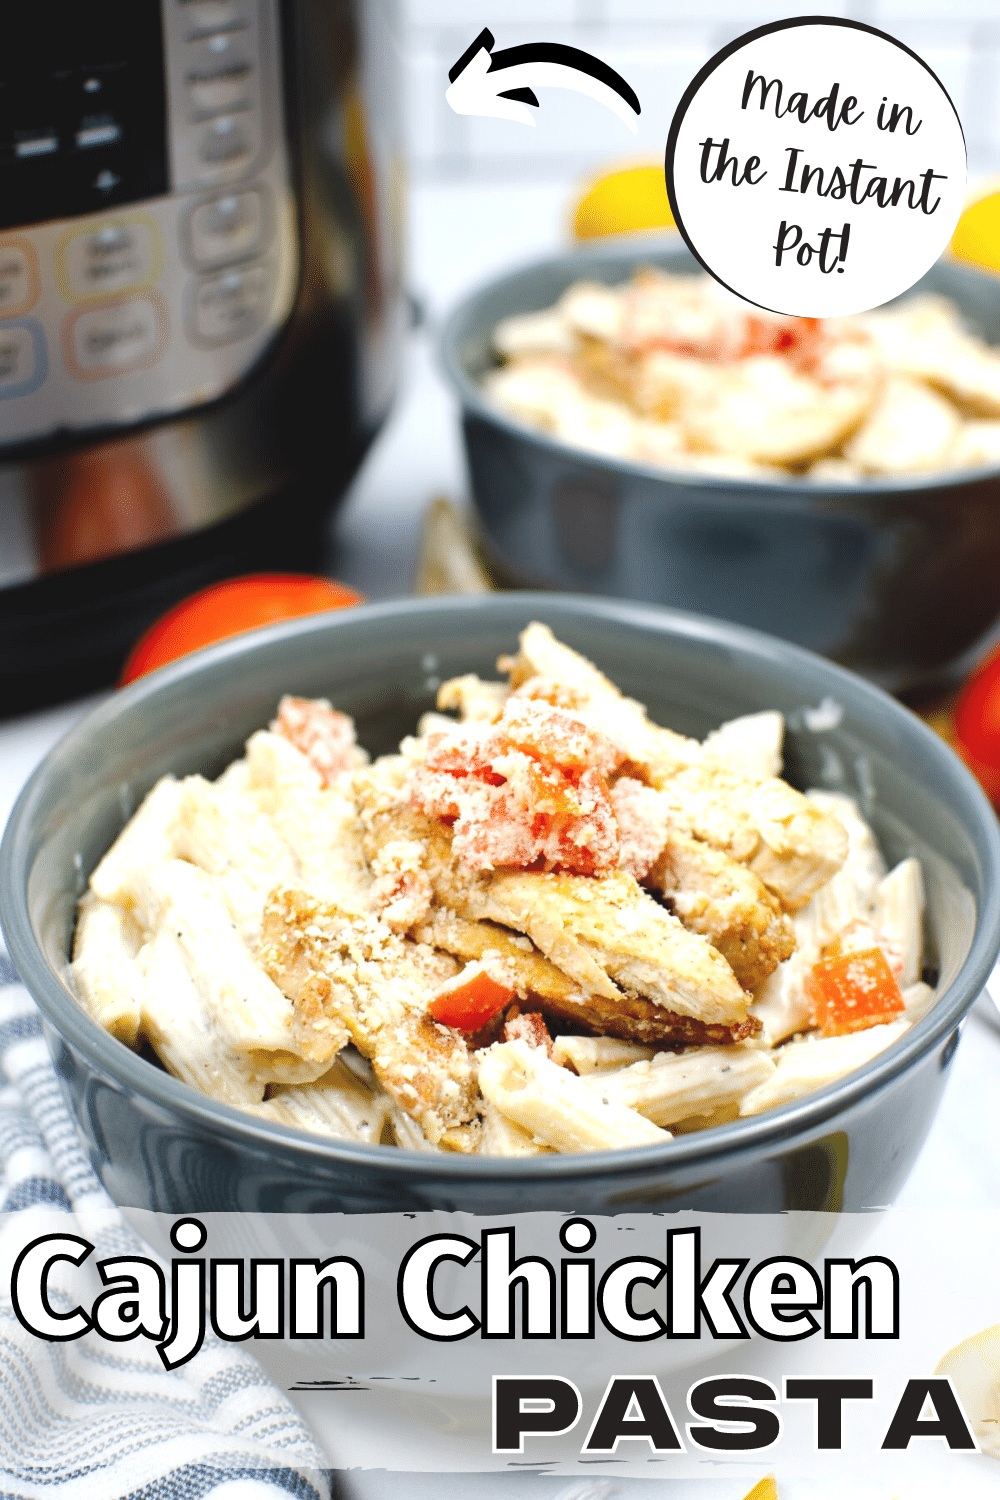 Instant Pot Cajun Chicken Pasta is a creamy and spicy pasta dish that's an easy weeknight dinner. It's family friendly & ready in 40 minutes! #instantpot #pressurecooker #cajun #chicken #pasta via @wondermomwannab